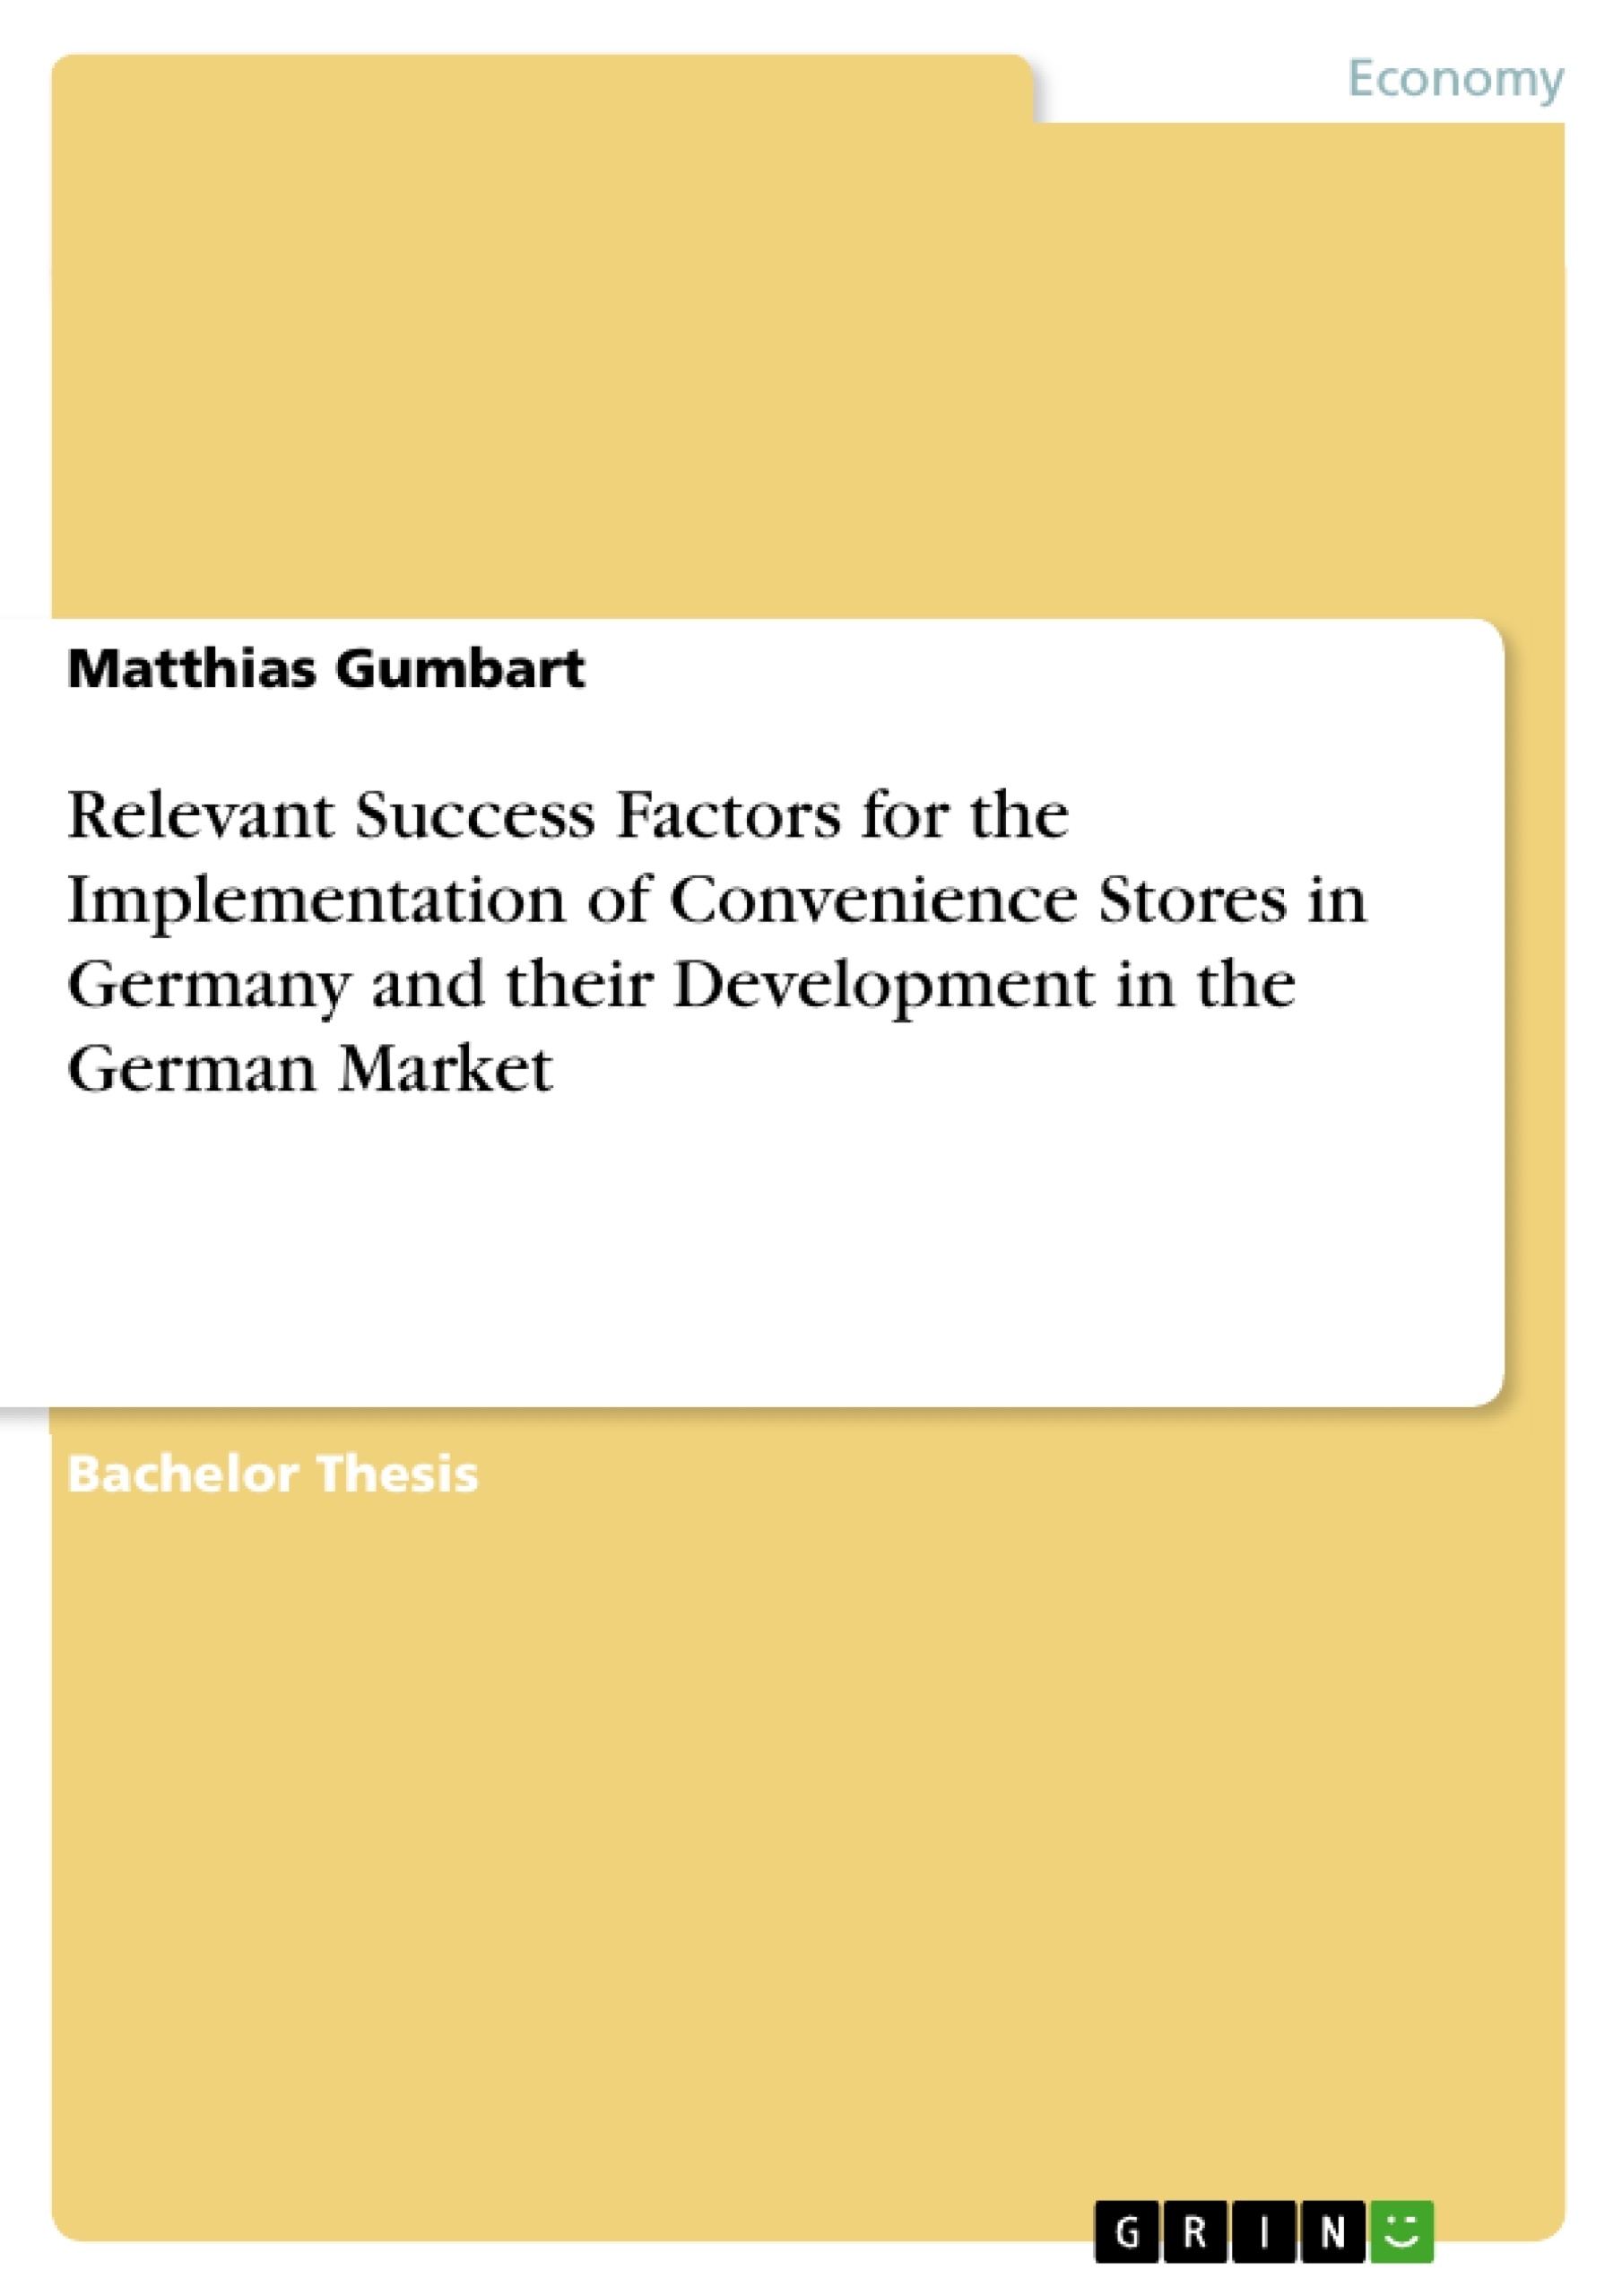 Titel: Relevant Success Factors for the Implementation of Convenience Stores in Germany and their Development in the German Market